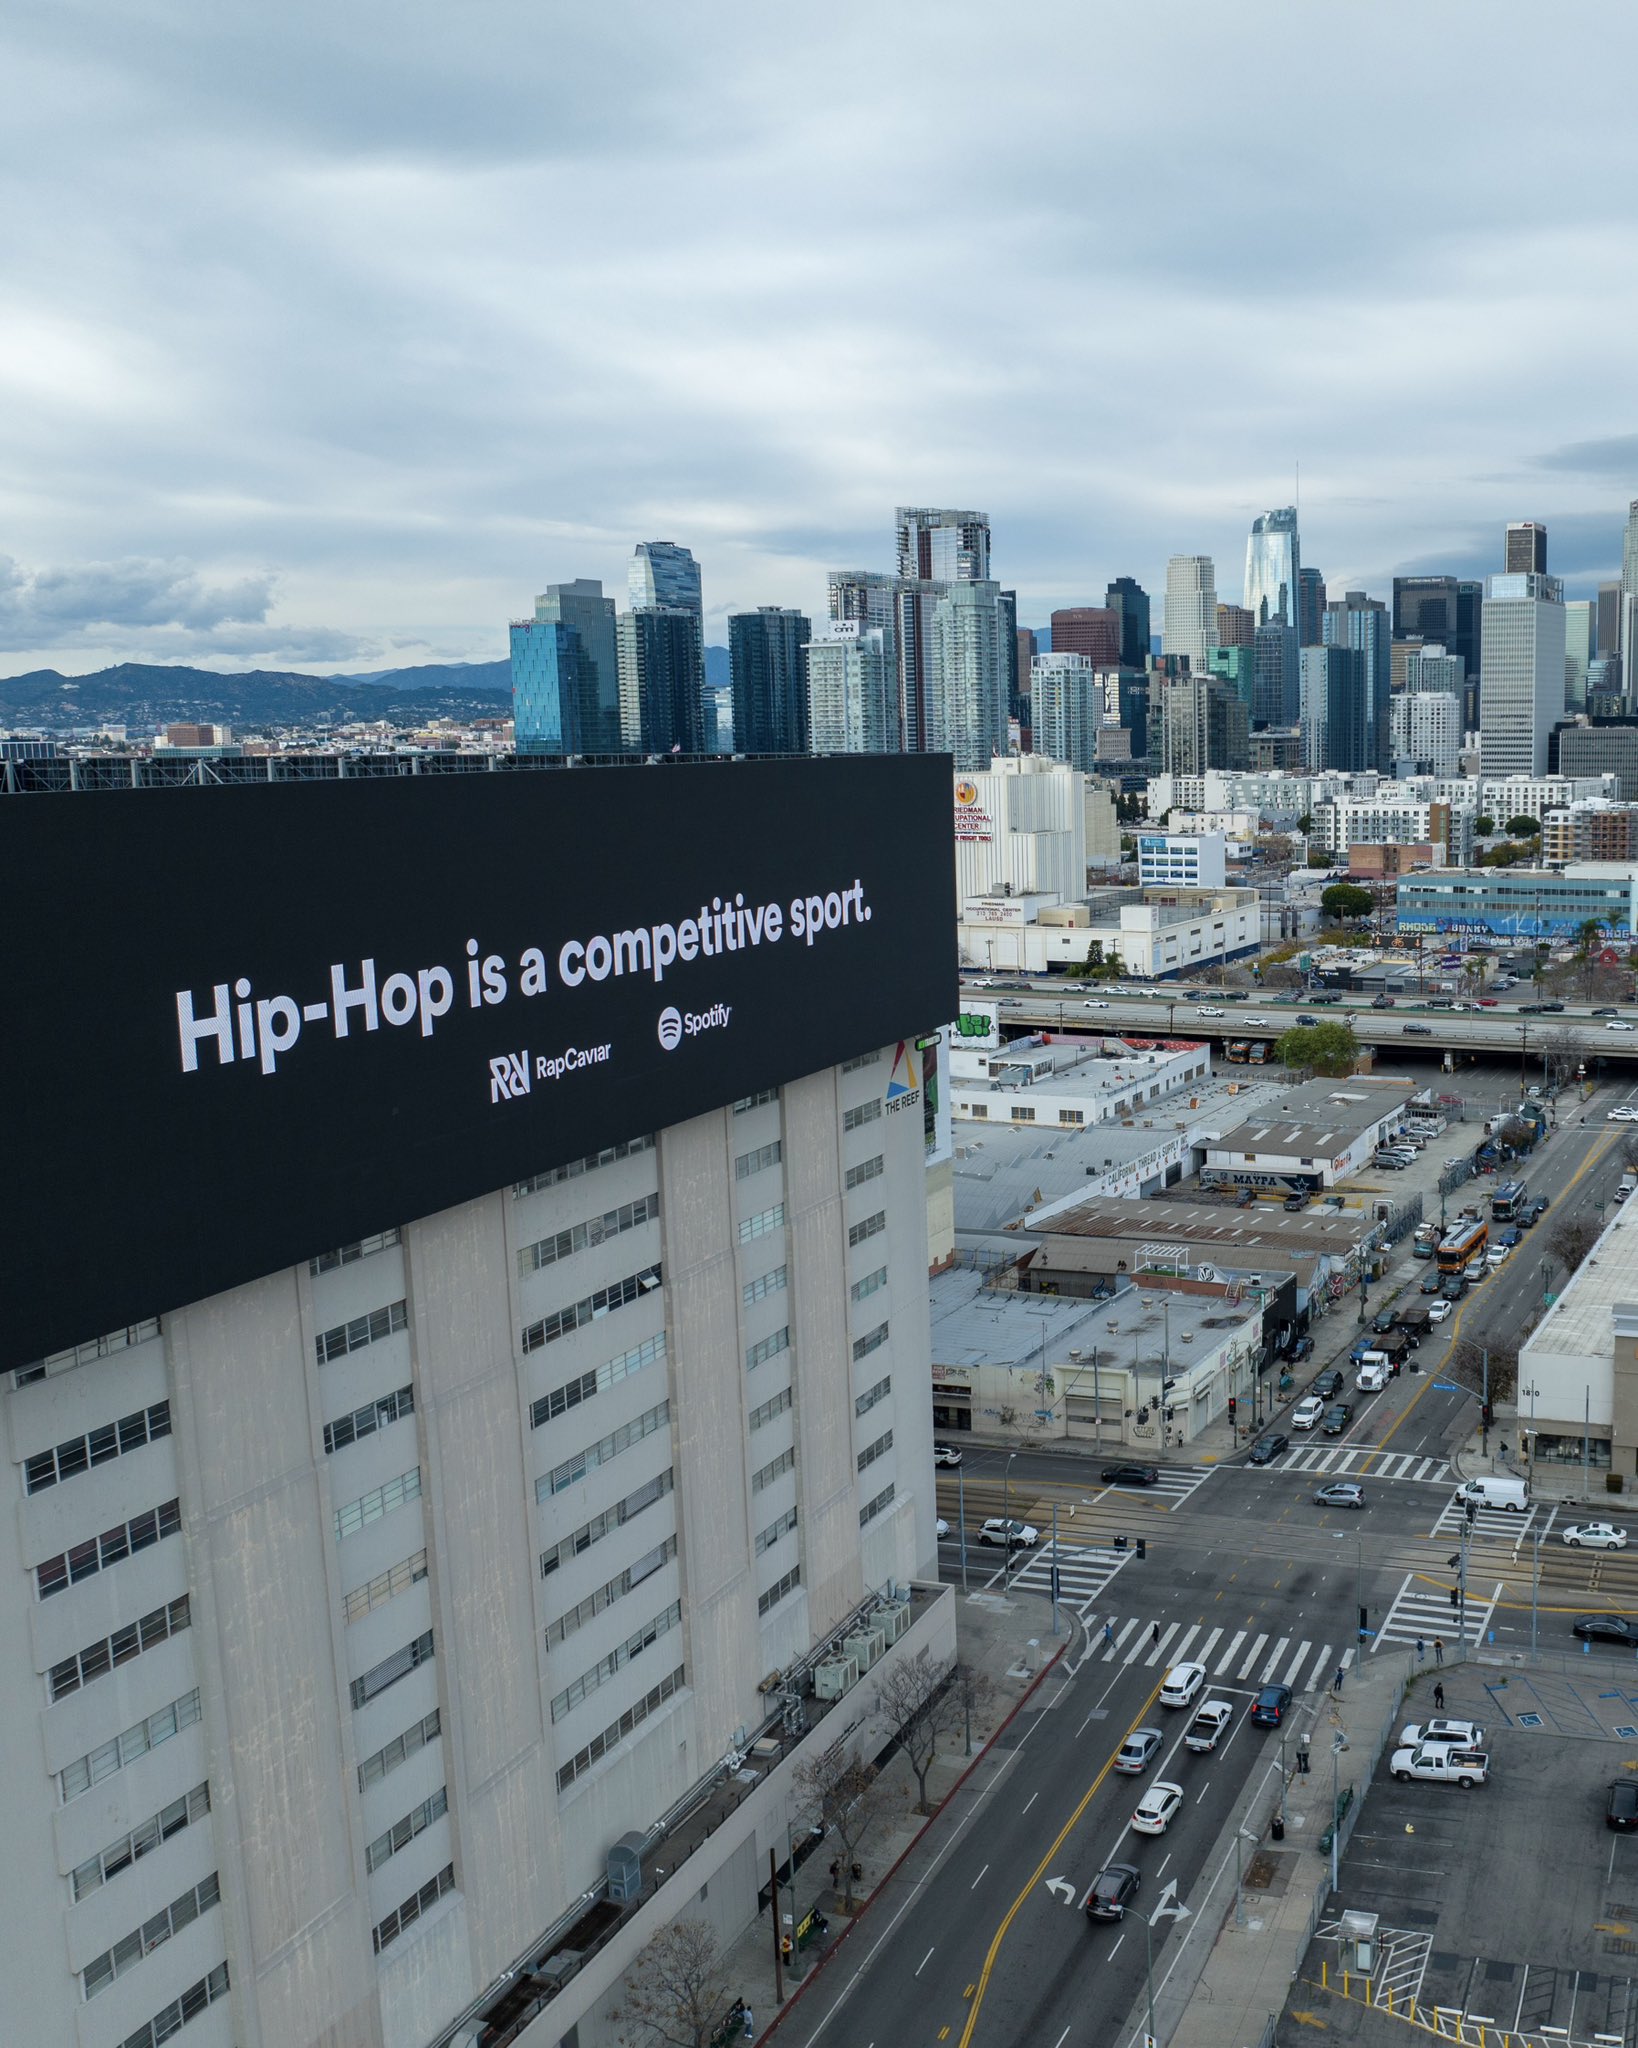 NFR Podcast on X: "“Hip-Hop is a competitive sport.” — Newly spotted  Spotify billboards 👀 https://t.co/iWWvUz9dNh" / X